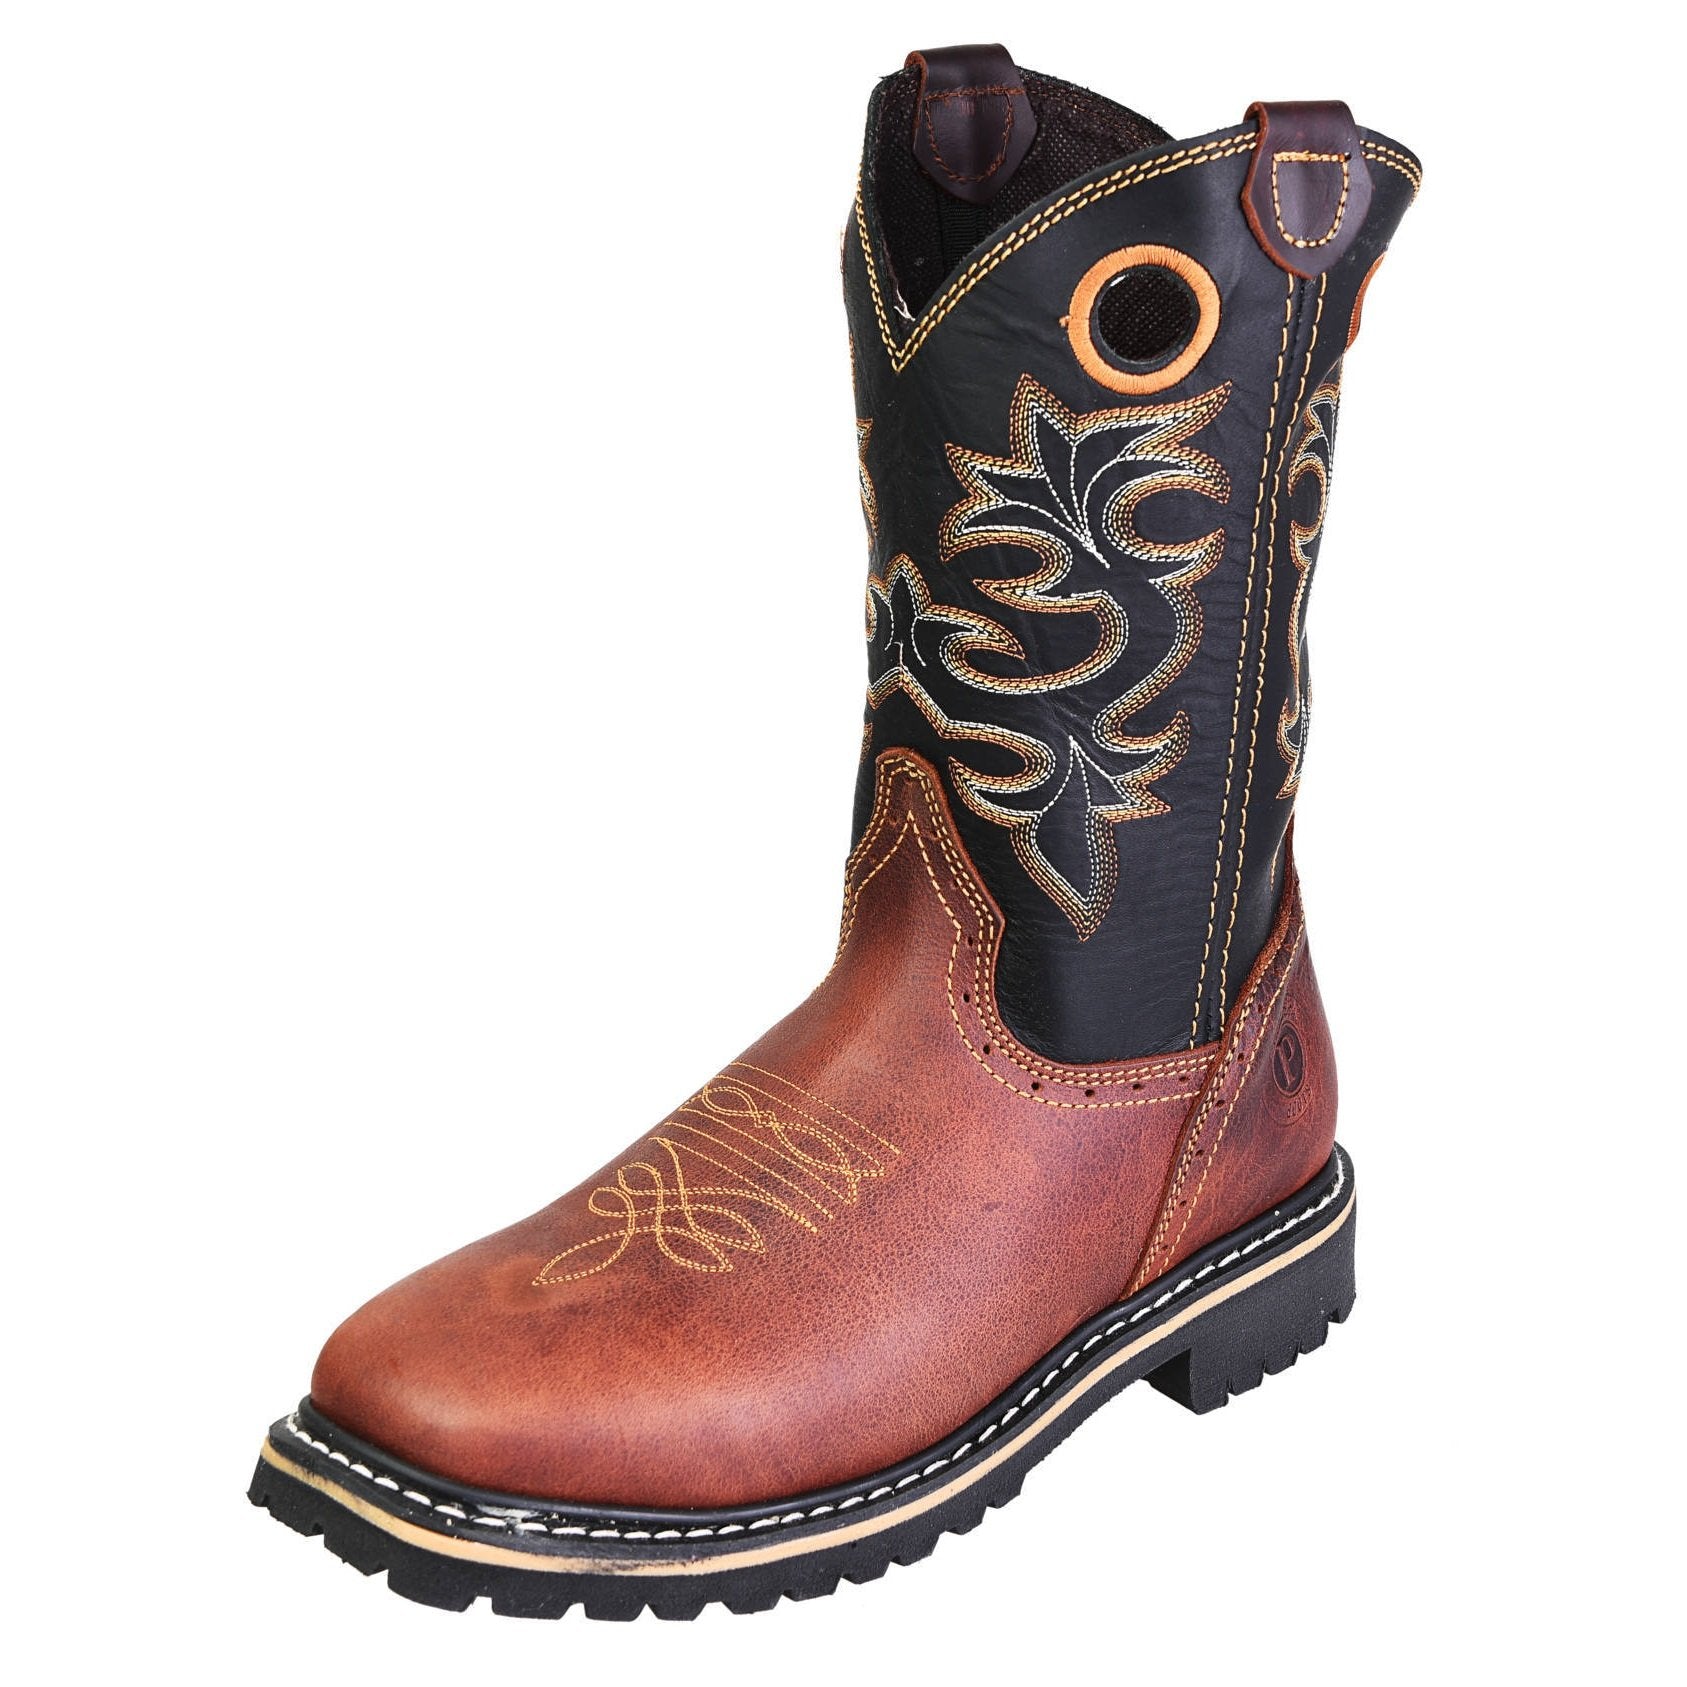 Men's Work Boots - Square Toe - Shedron Work Boots - Pradera - Pull On Work Boots - Shedron Wellington Work Boots